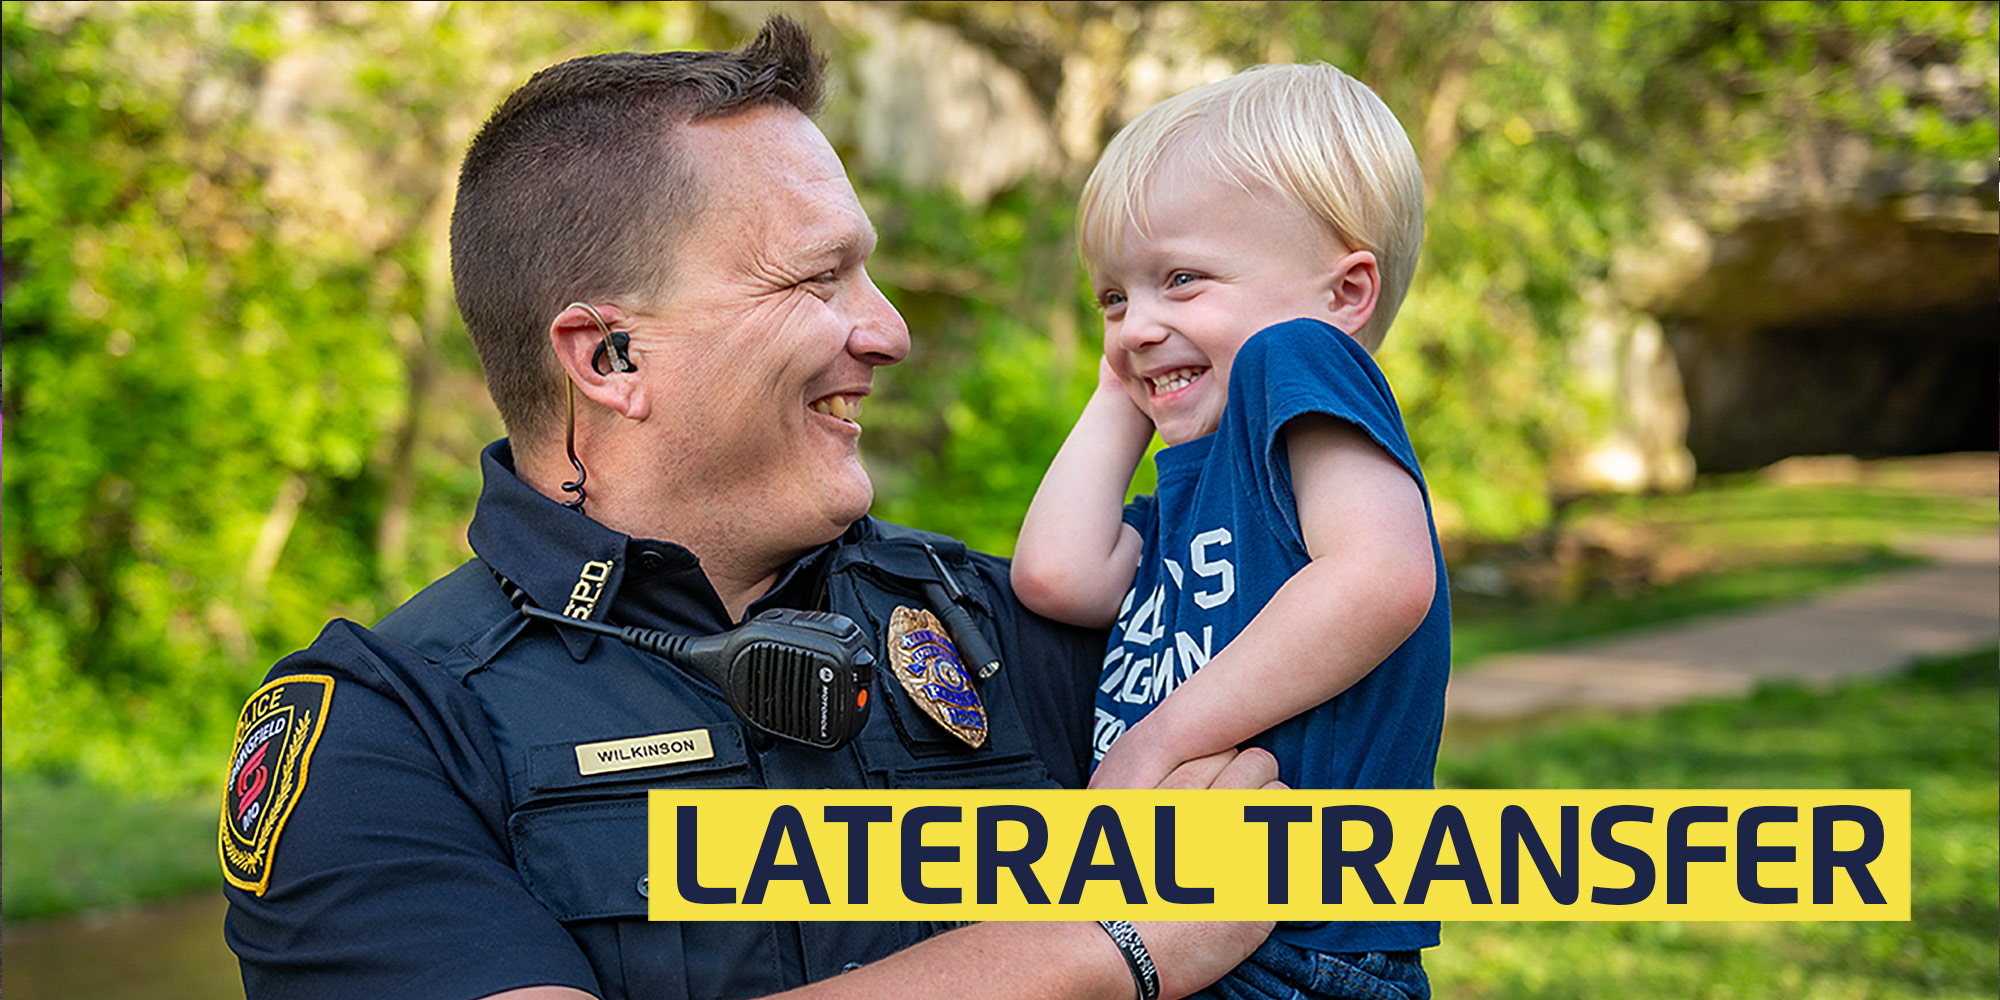 smiling police officer holding laughing son in a park with text: lateral transfer